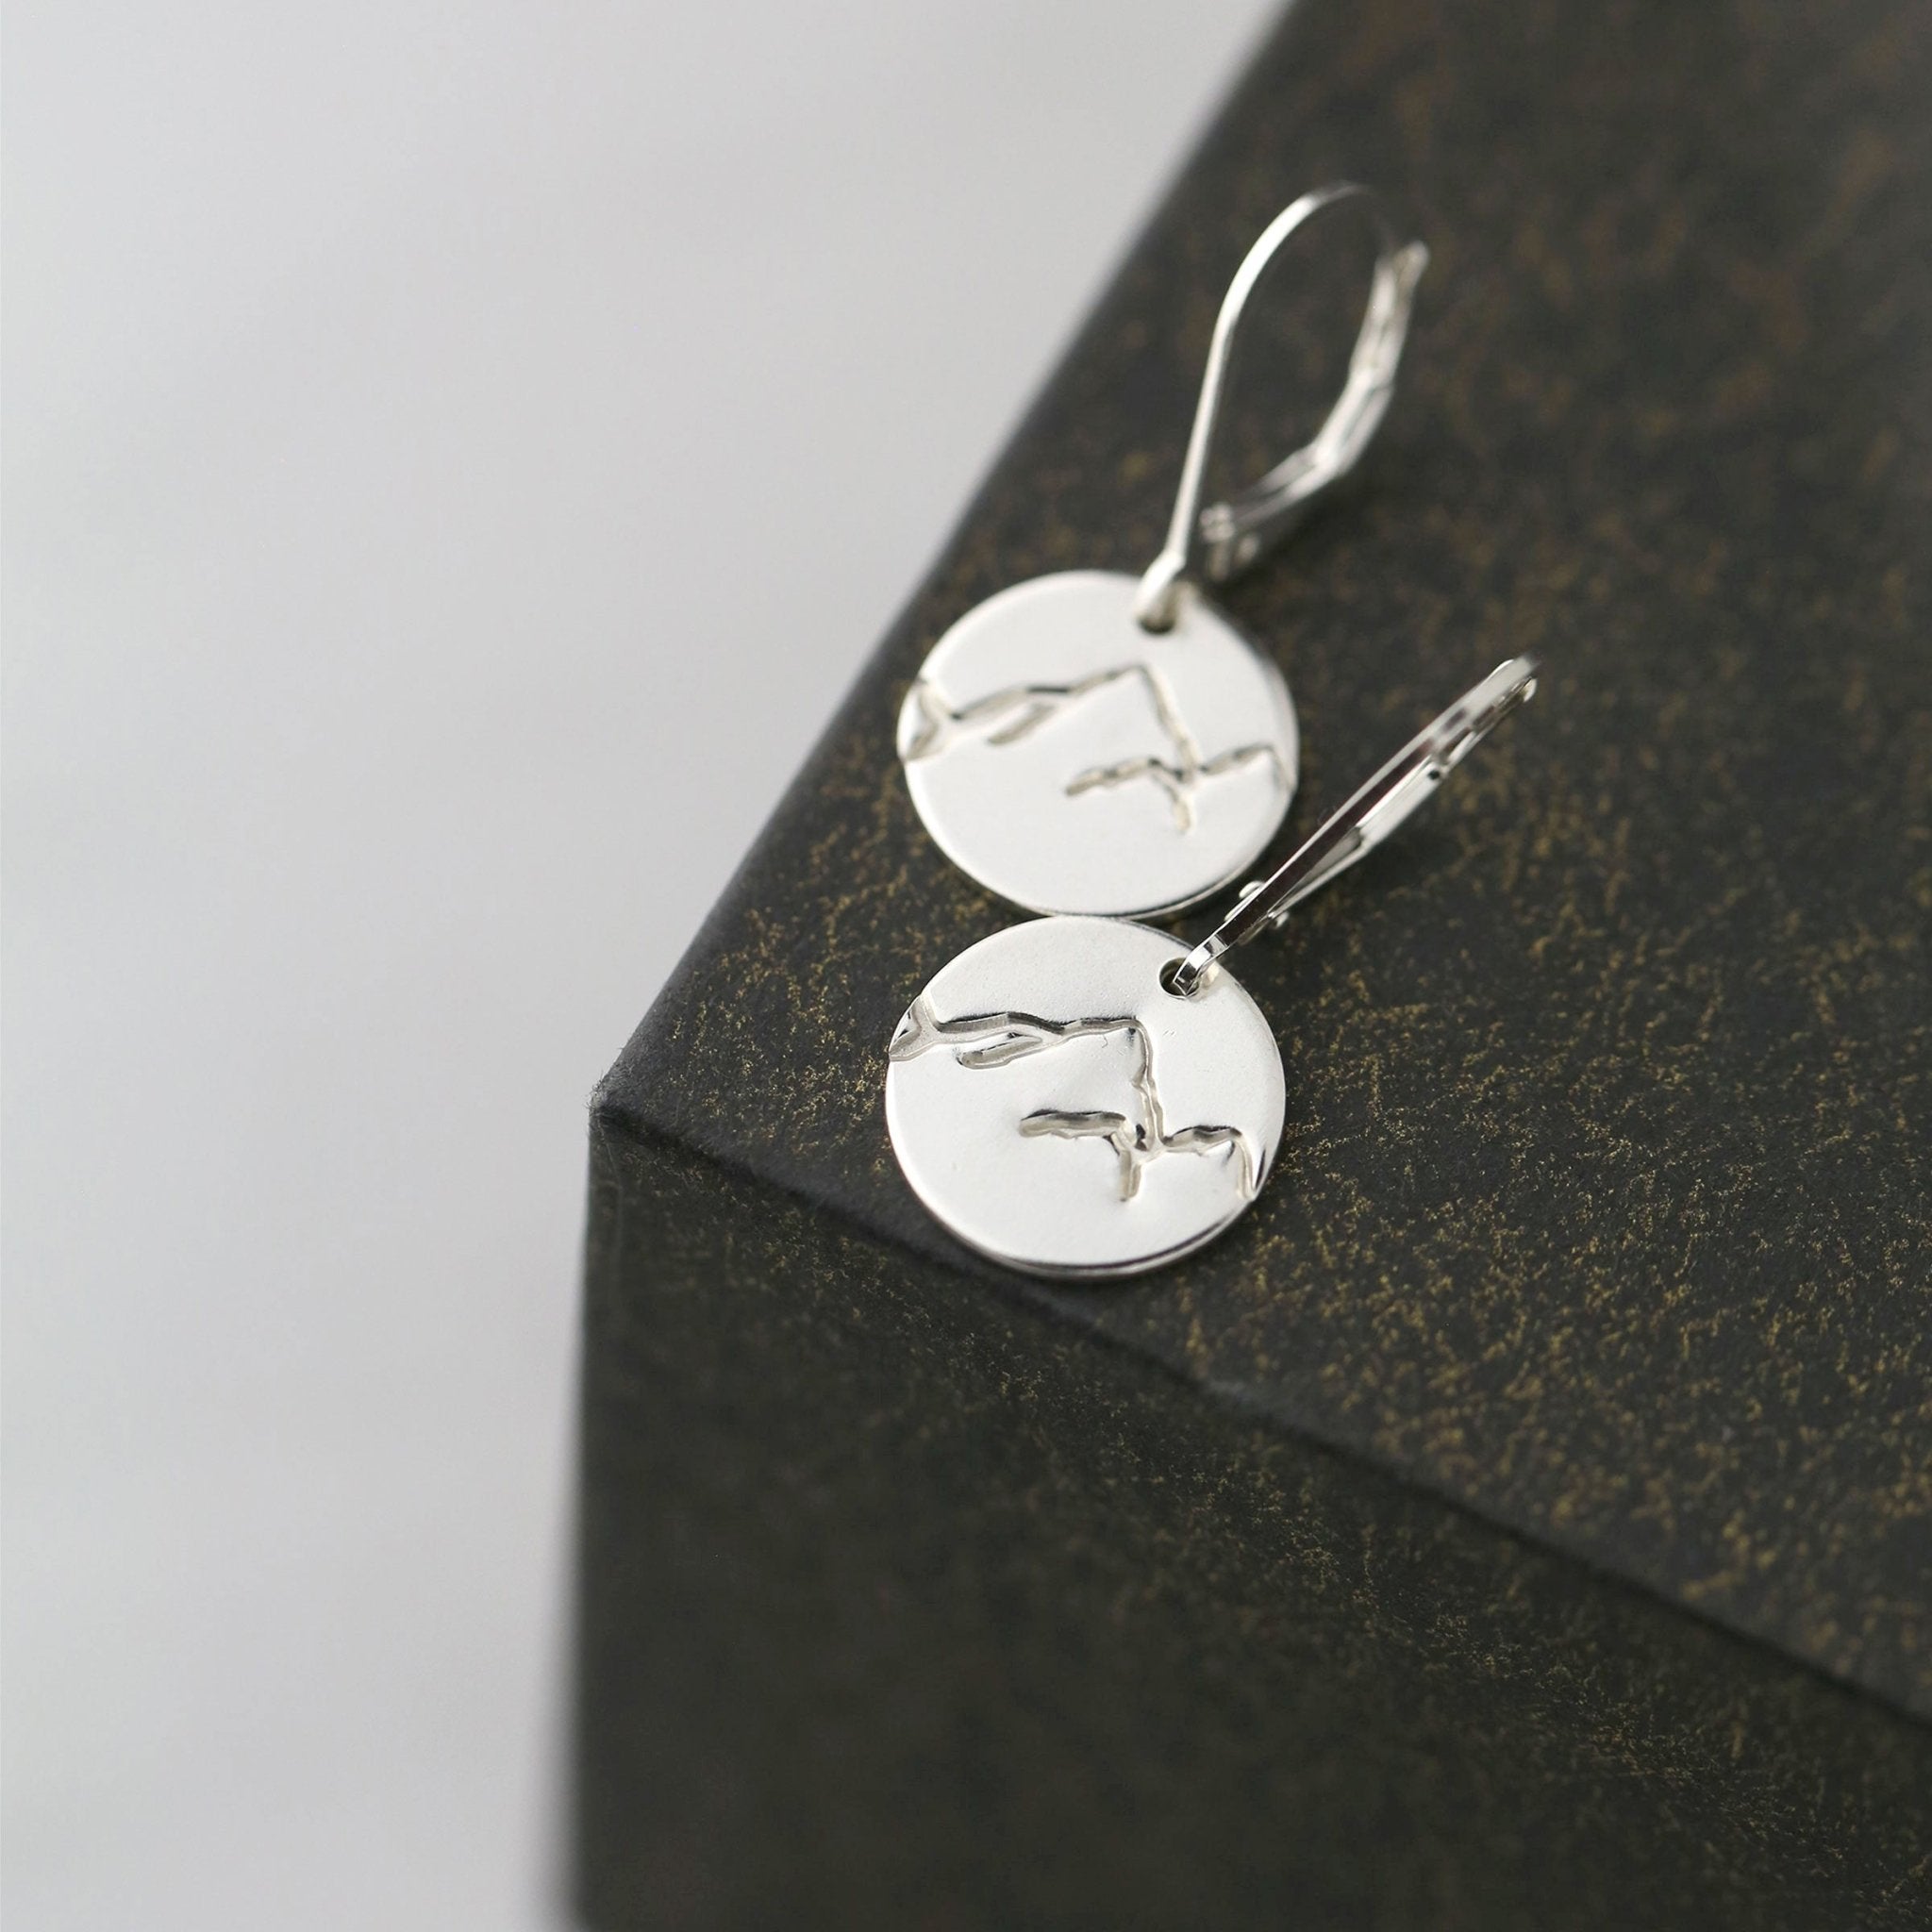 Silver Stamped Mountain Earrings